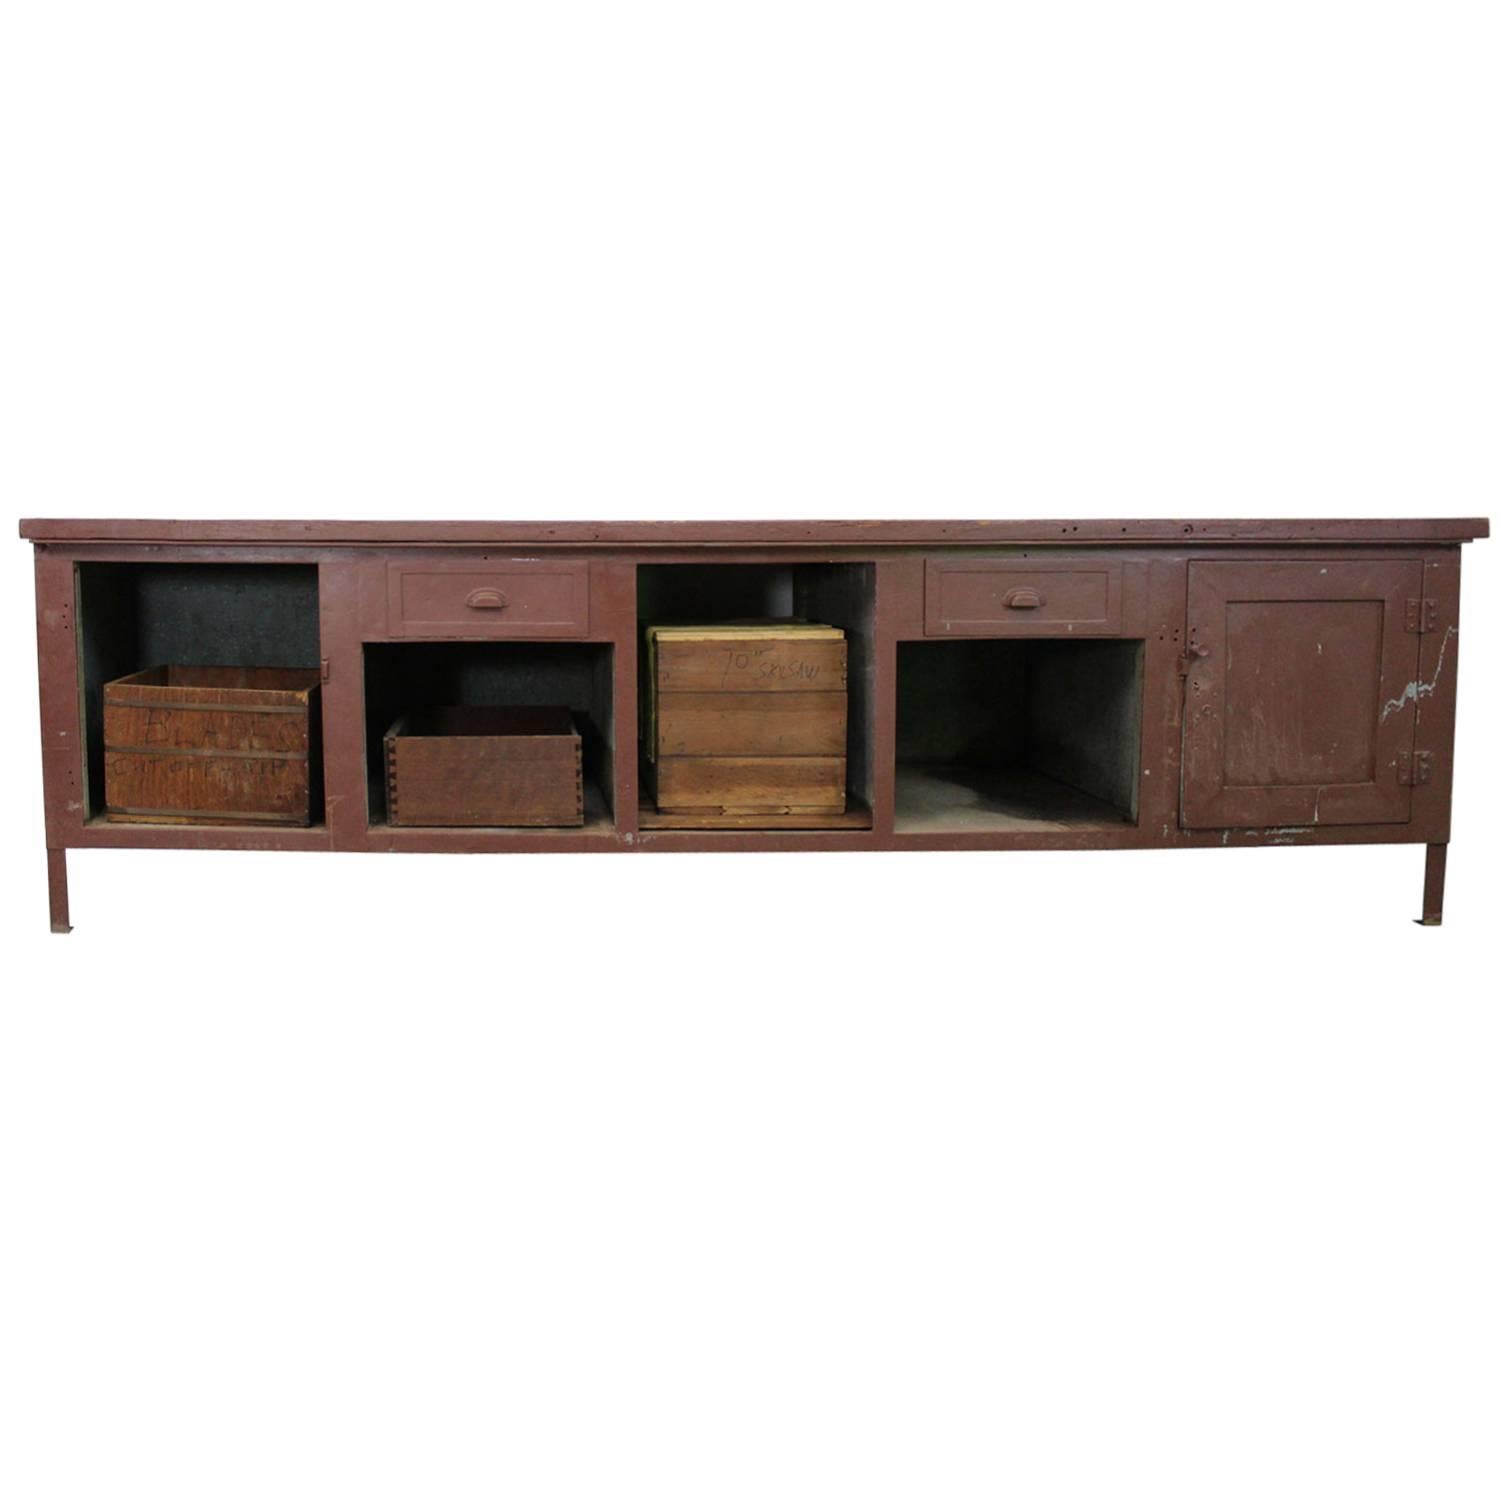 Rustic Workbench or Cabinet For Sale